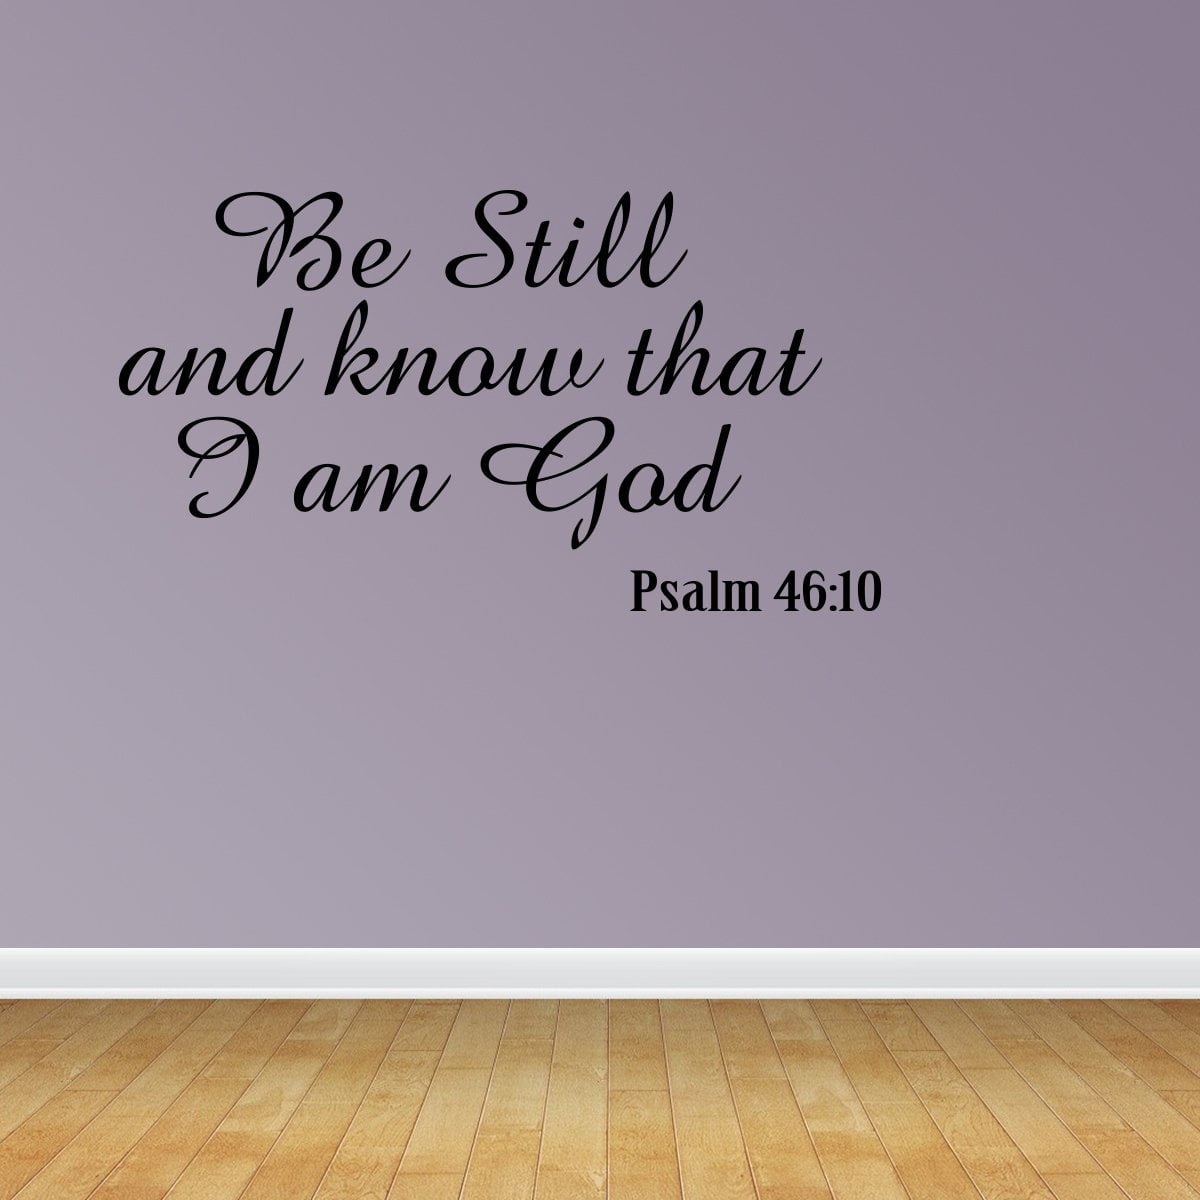 Be still and know that I am God rustic wood sign scripture wall art farmhouse decor home decor